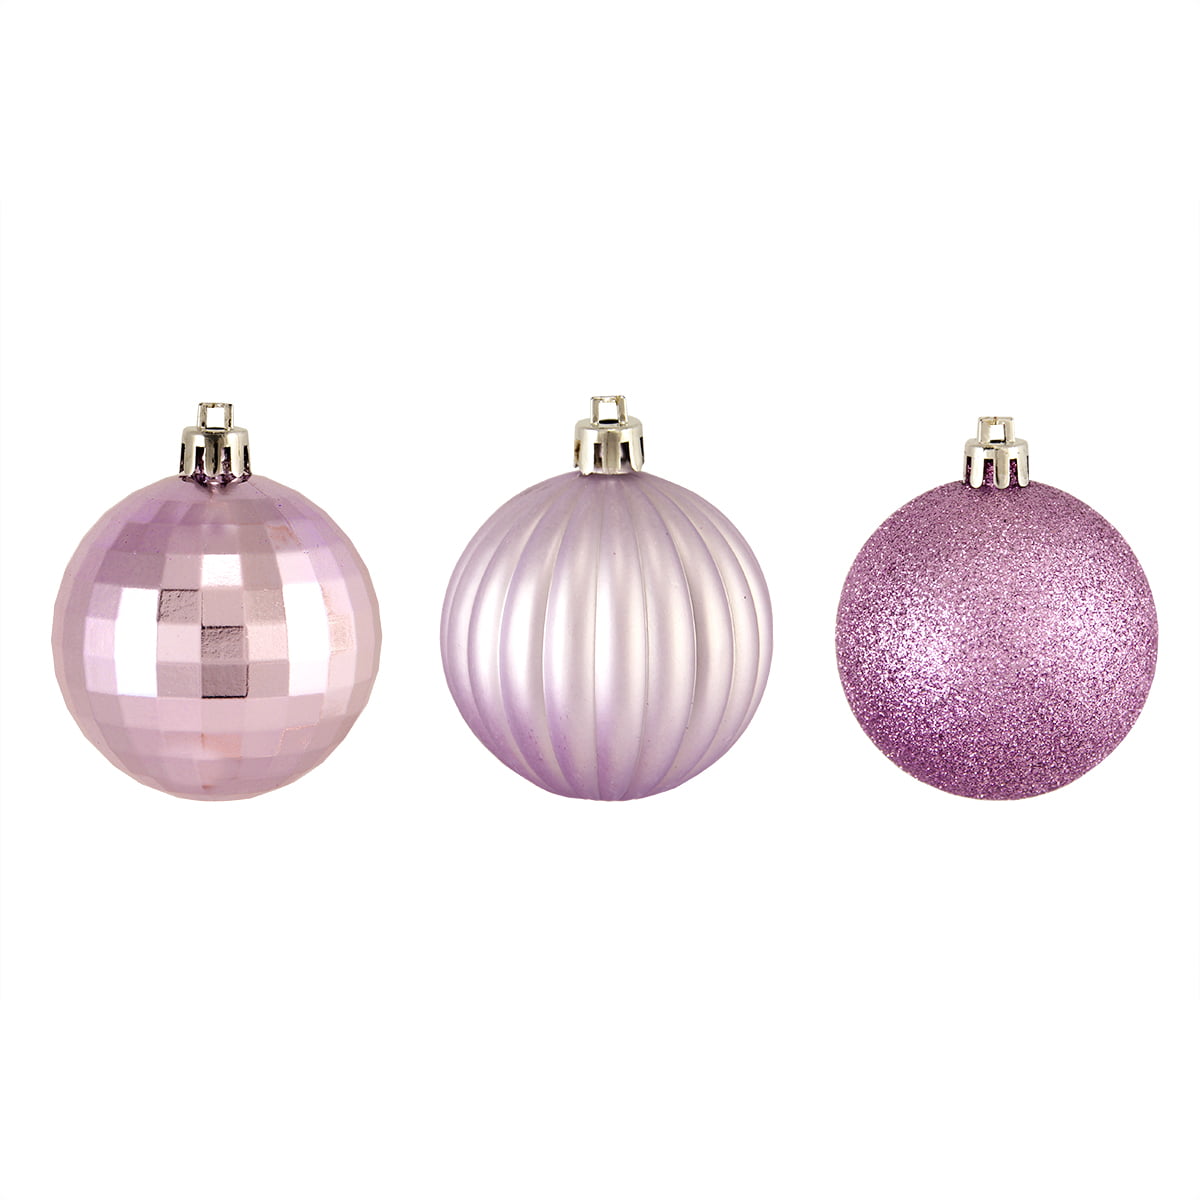 8 Christmas Ornaments 2 3/4 " Ball Shatterproof Purple Your choice of Style New 